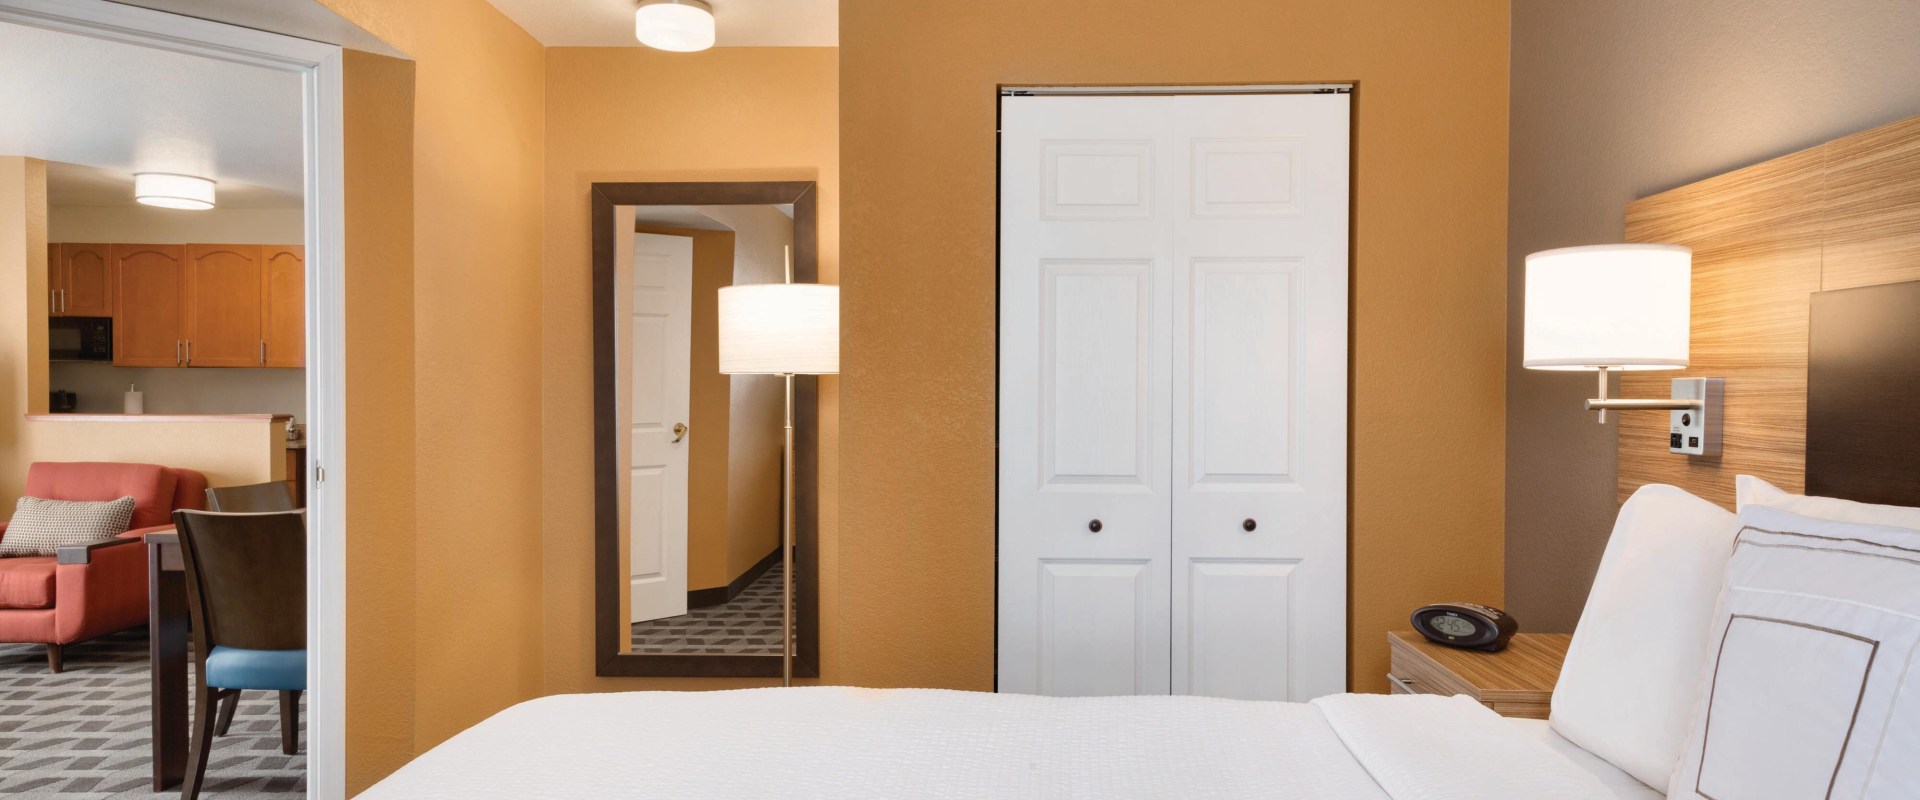 What is the Minimum Age Requirement for Staying at Suites in Denver, Colorado?